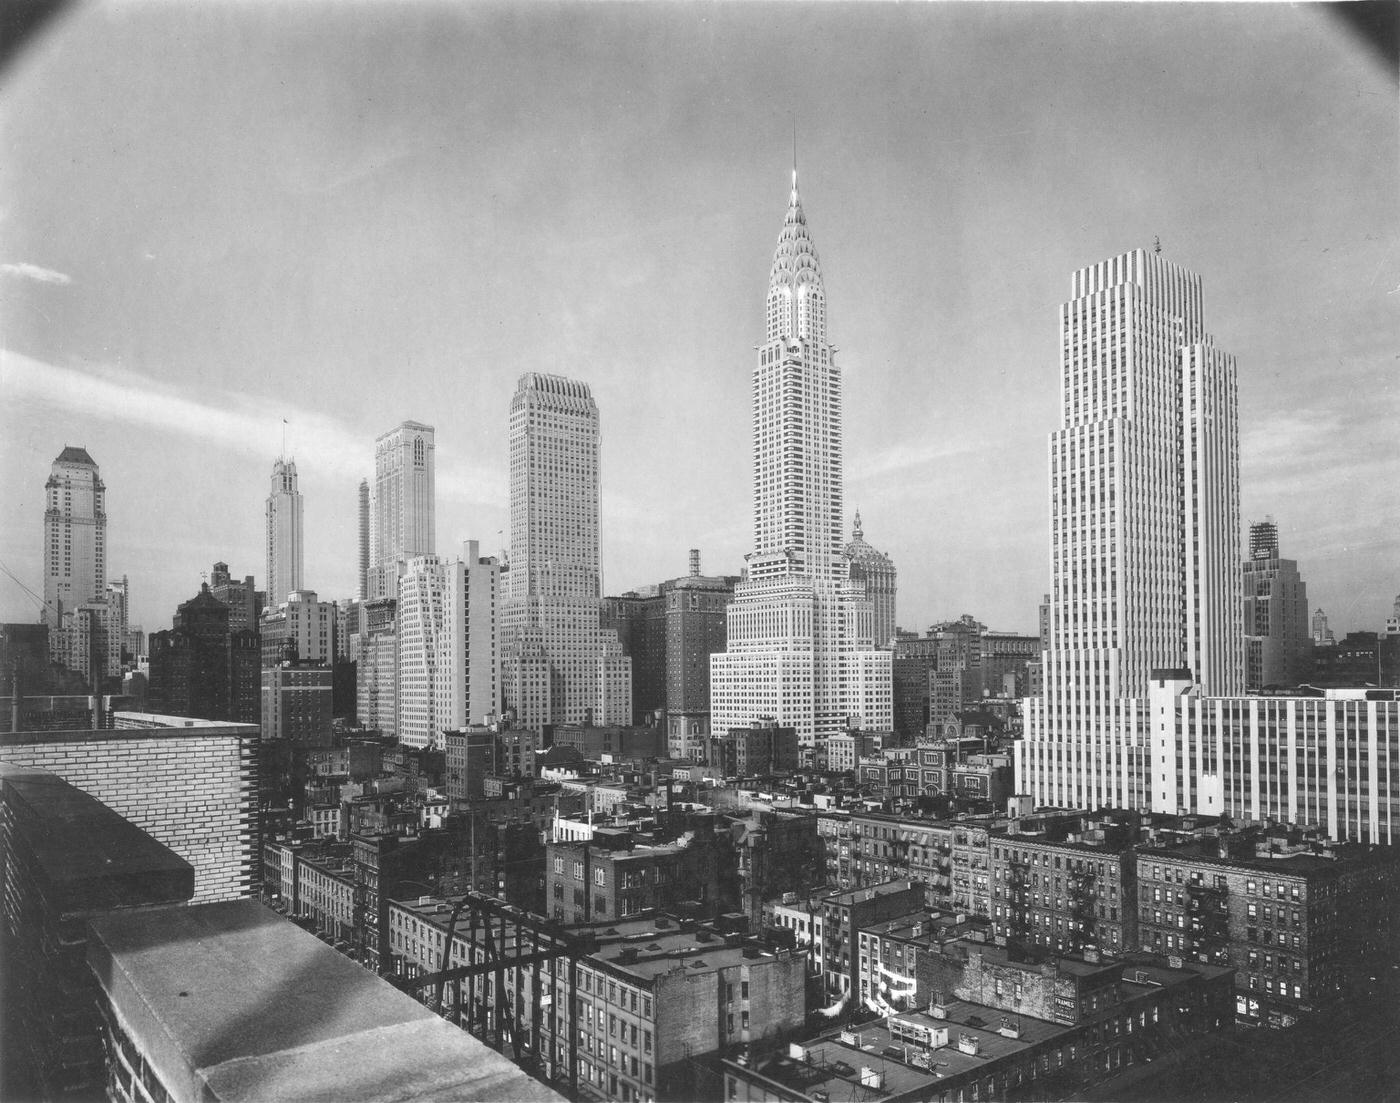 Skyline From Third Avenue Showing The Chrysler Building, Manhattan, 1929